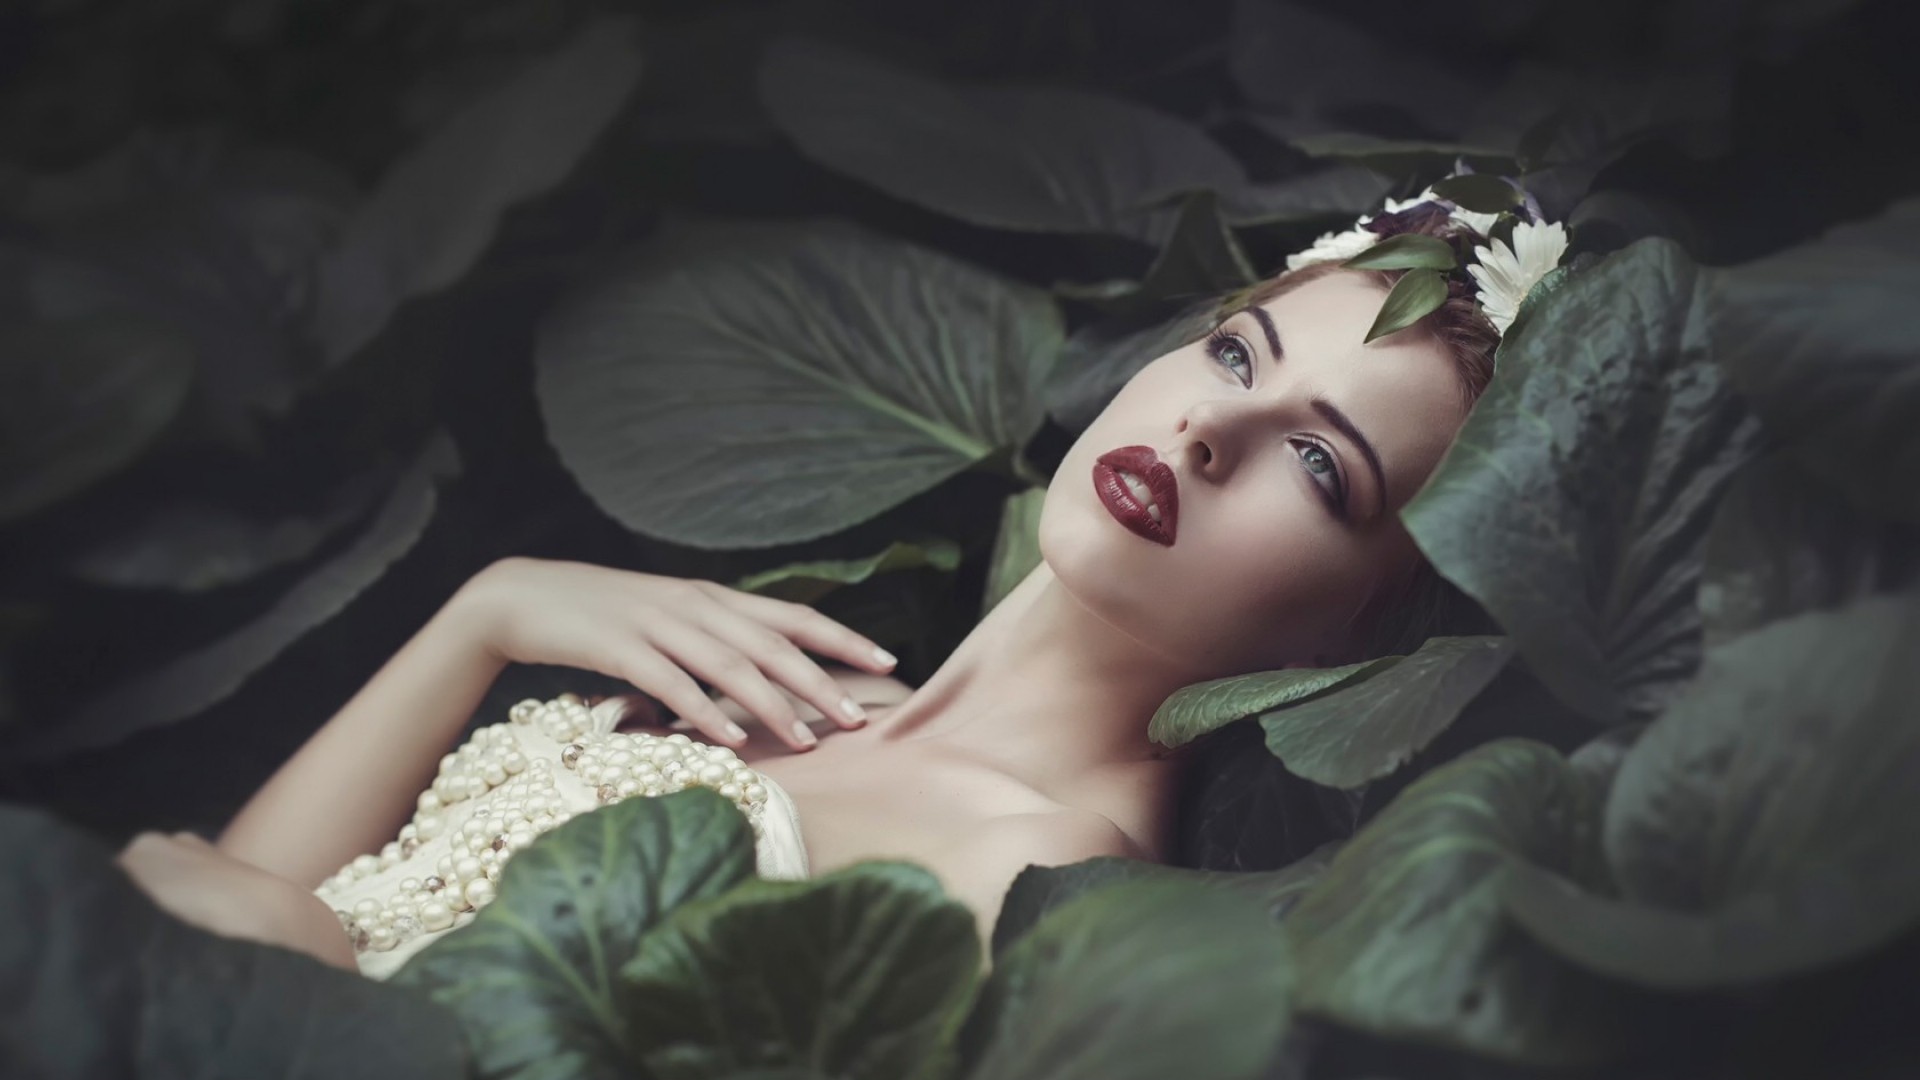 People 1920x1080 women nature model dress women outdoors brunette red lipstick face open mouth leaves pearls water lilies flower in hair fantasy girl makeup plants looking up